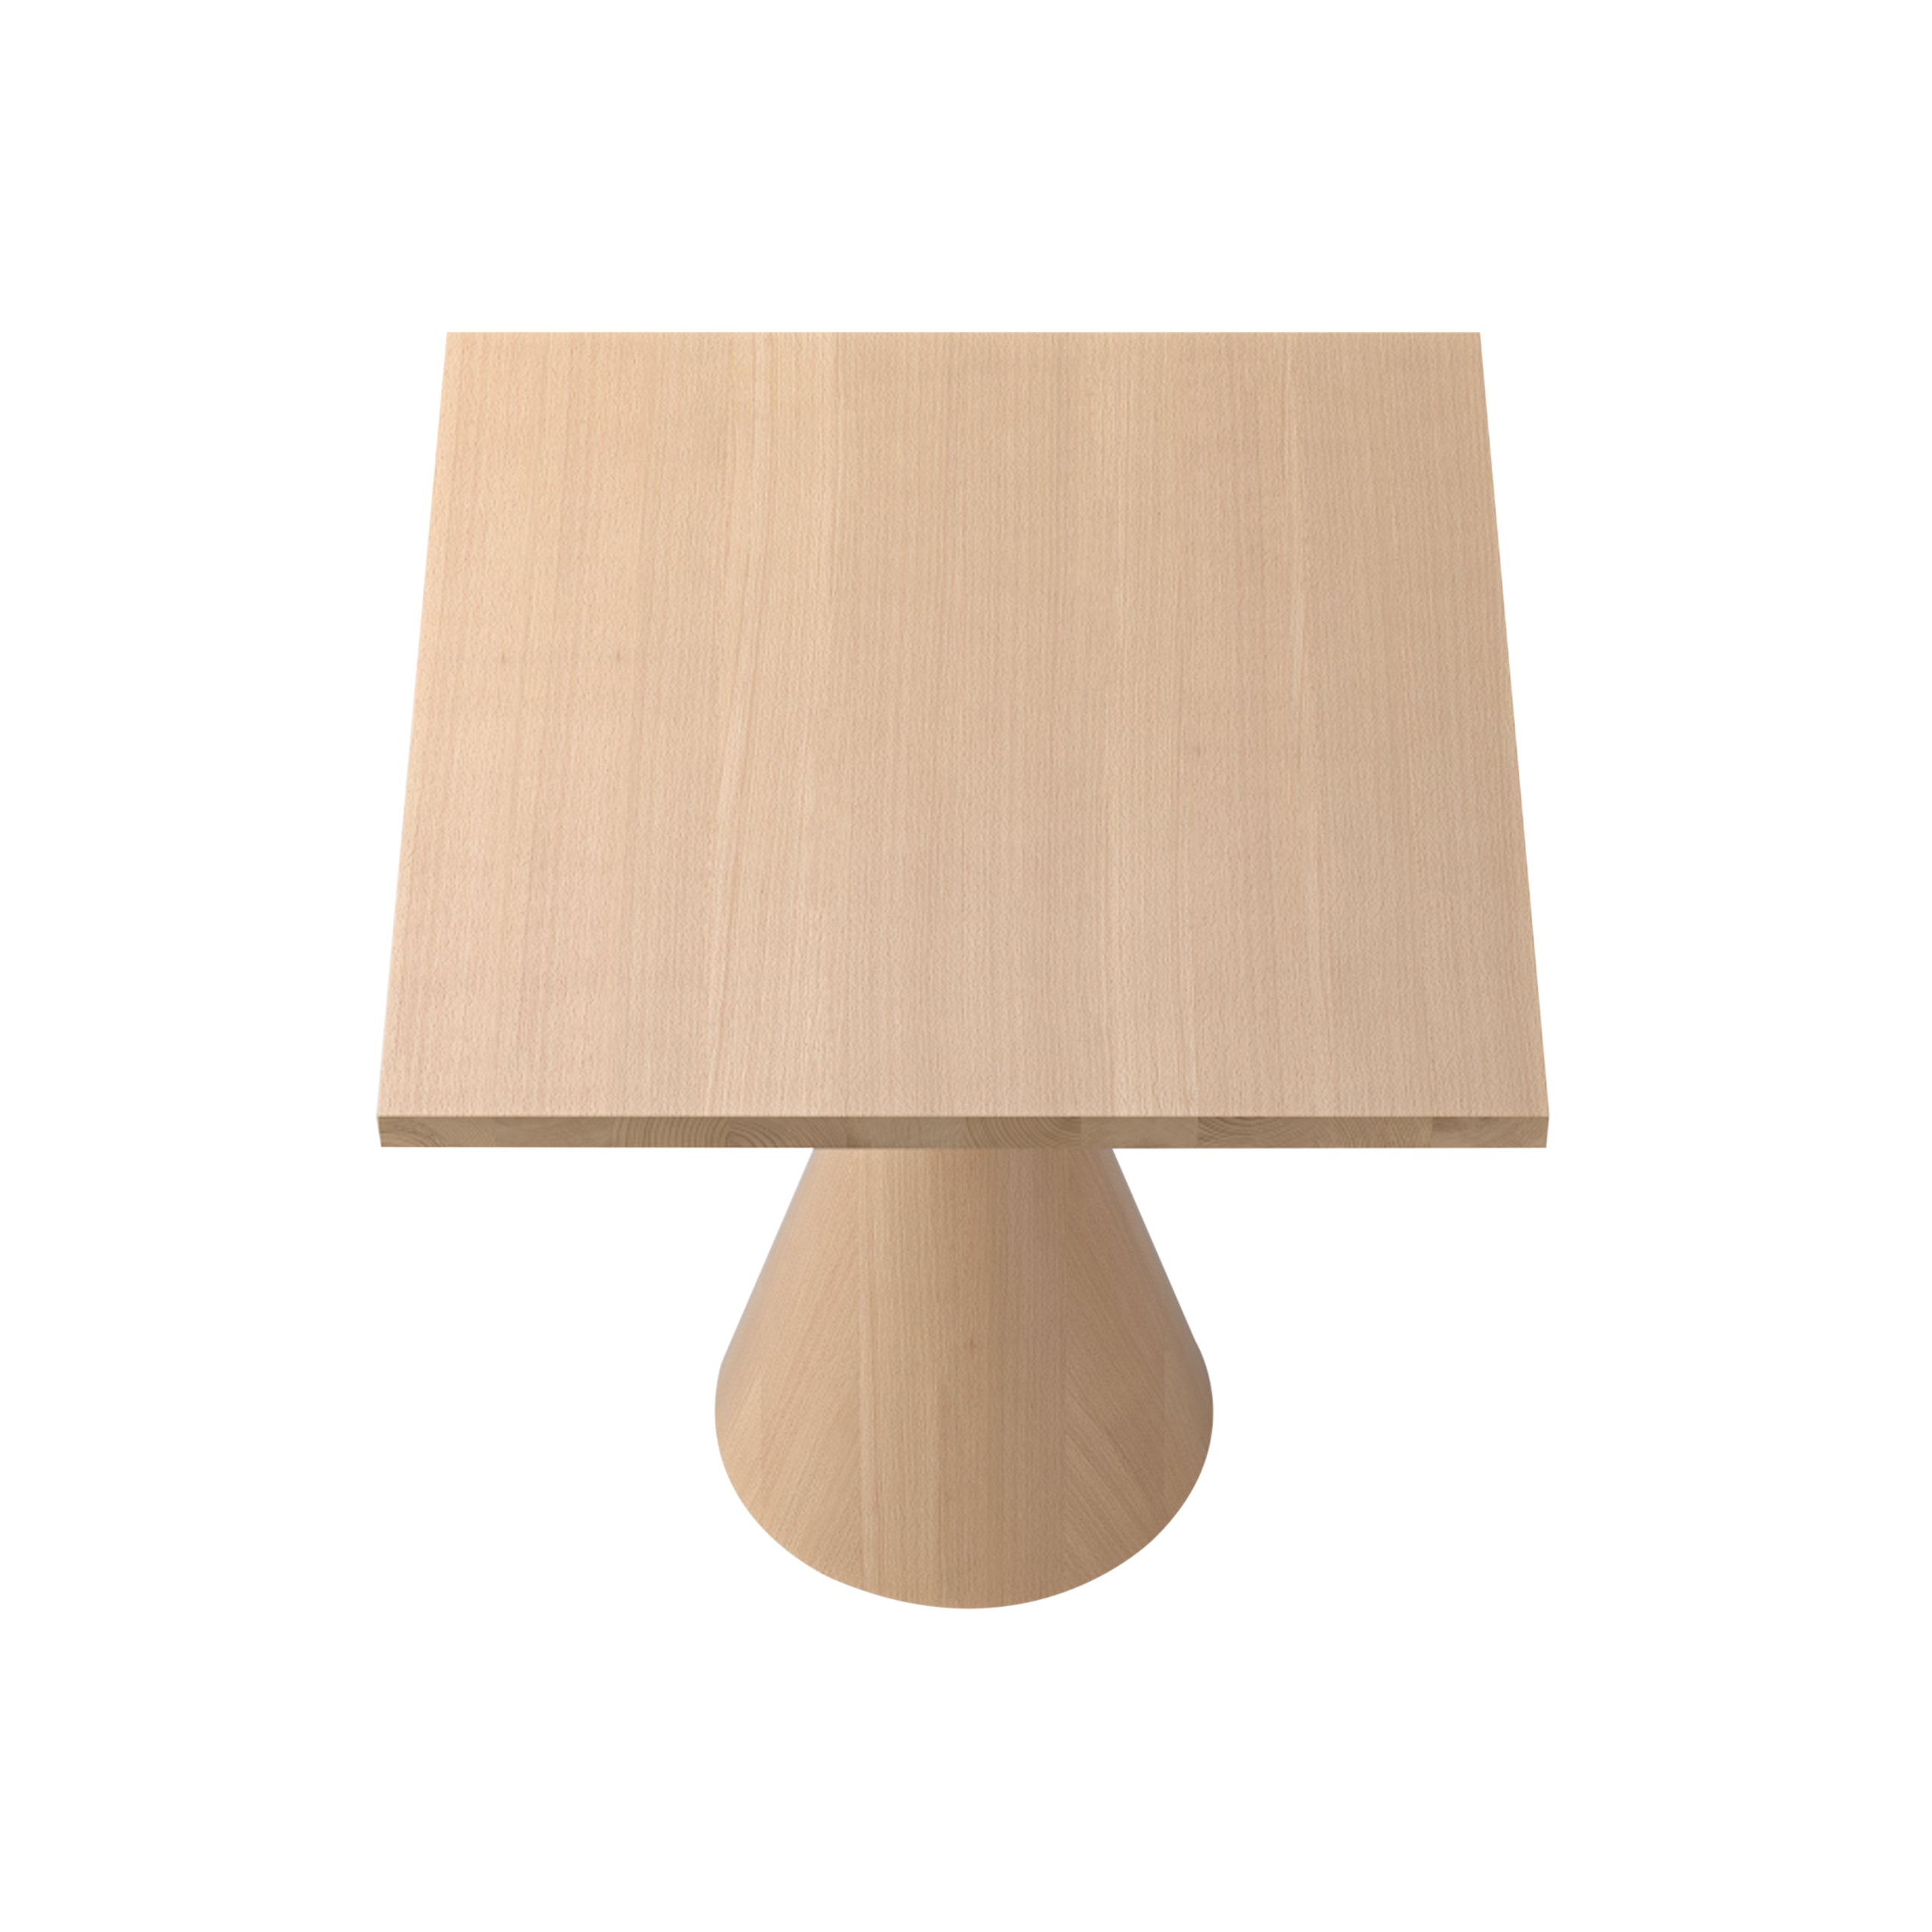 Draft Dining Table: Small - 28.7